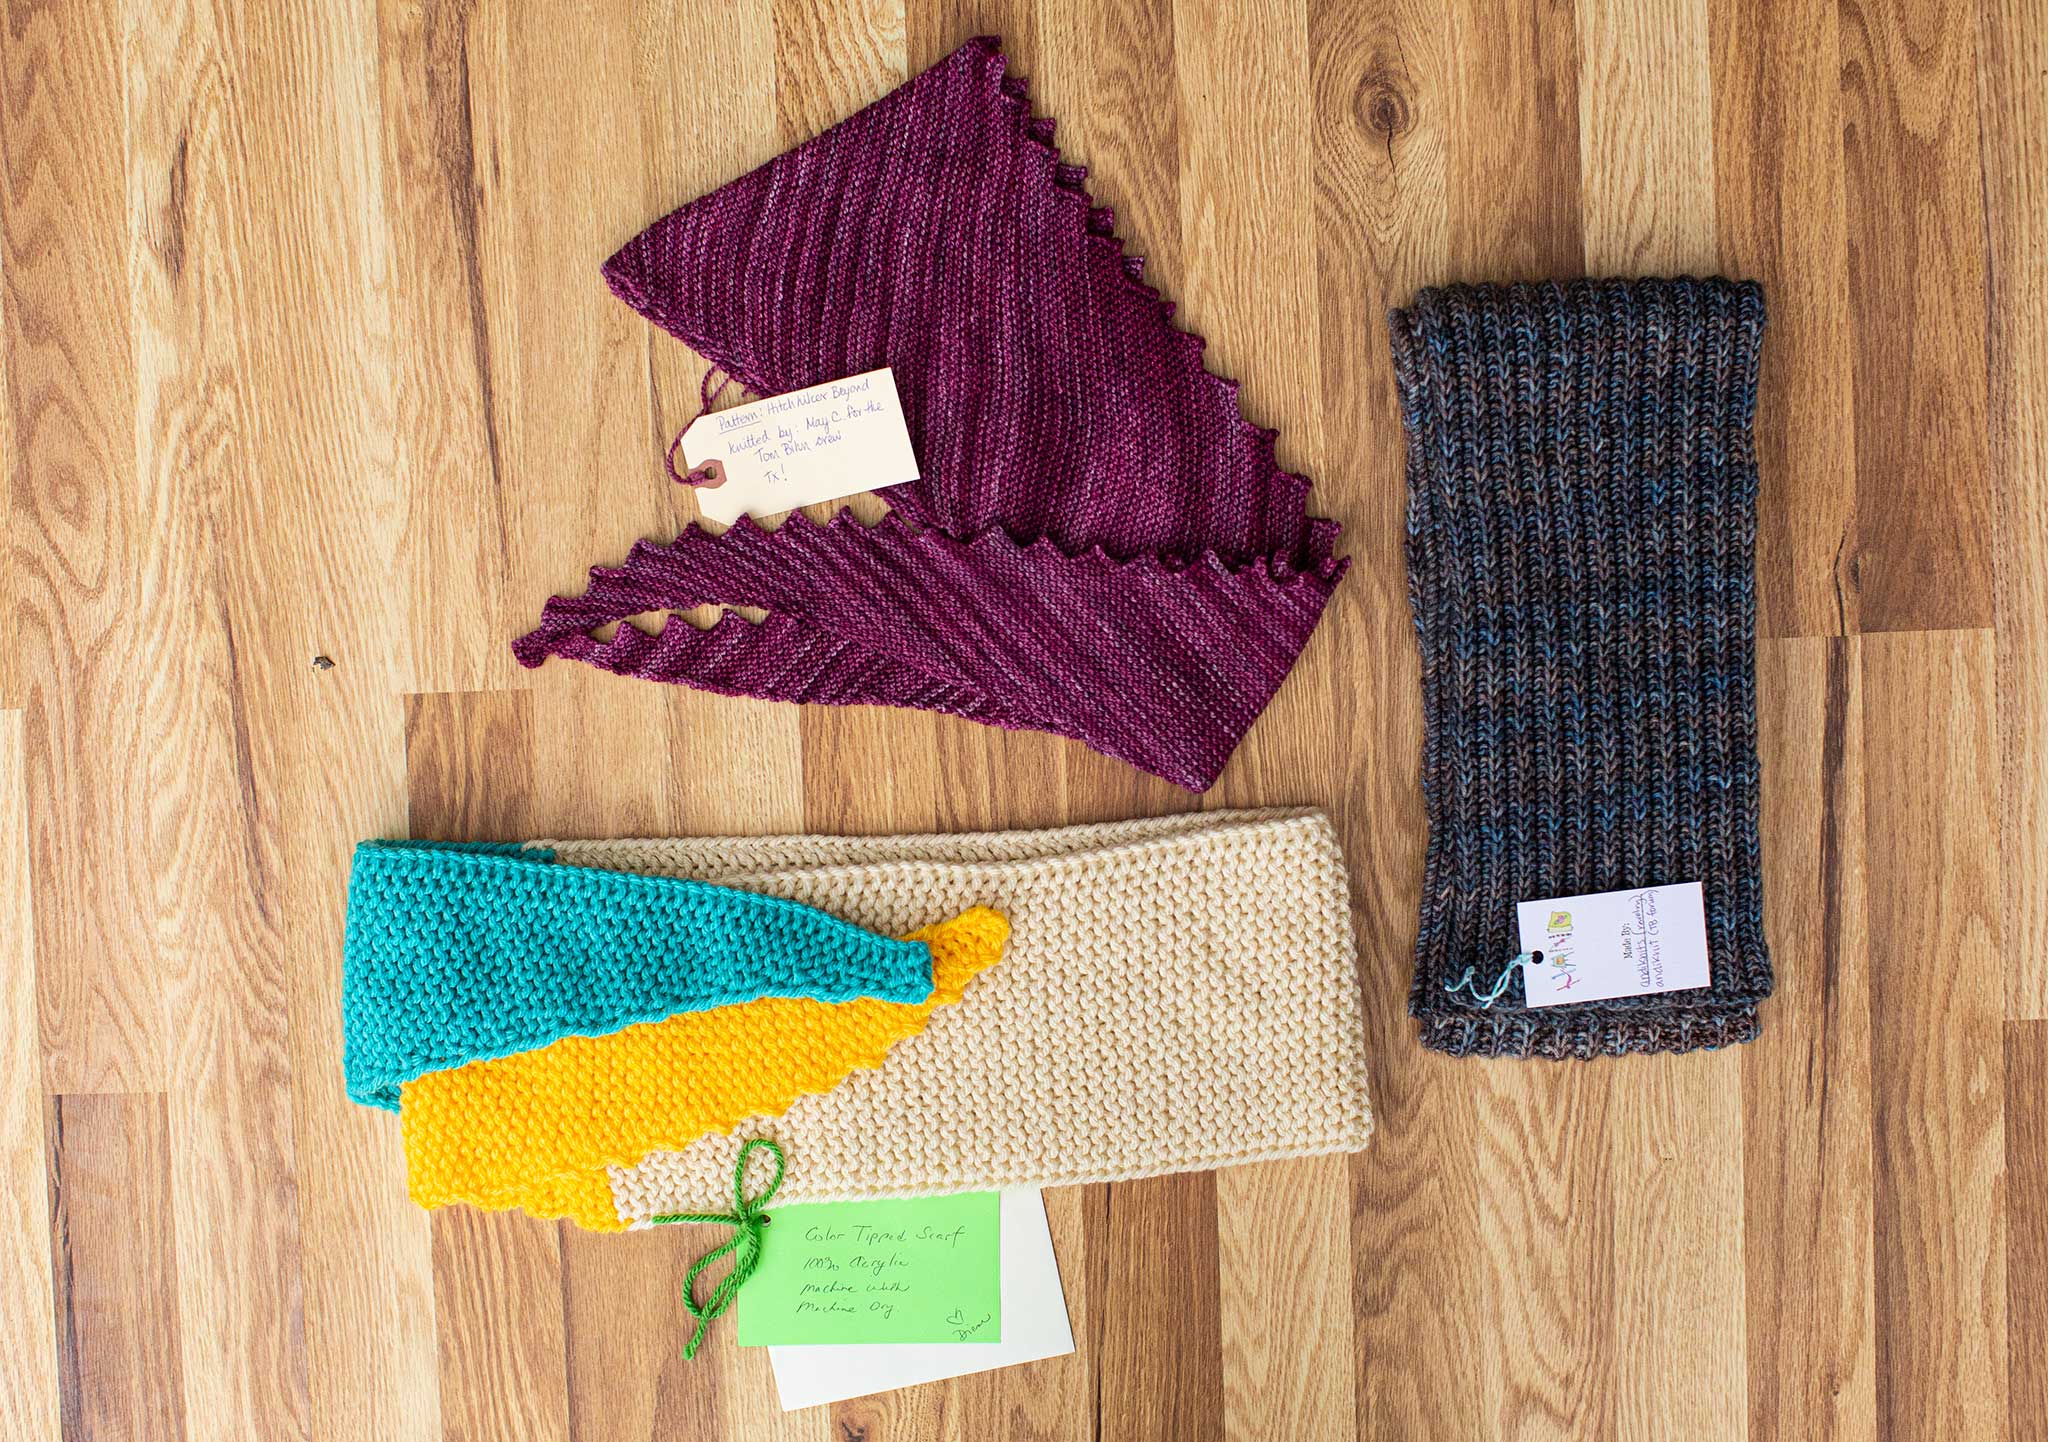 Three beautiful cowls and scarves! One is purple/red, blue/green, and white/blue/yellow.